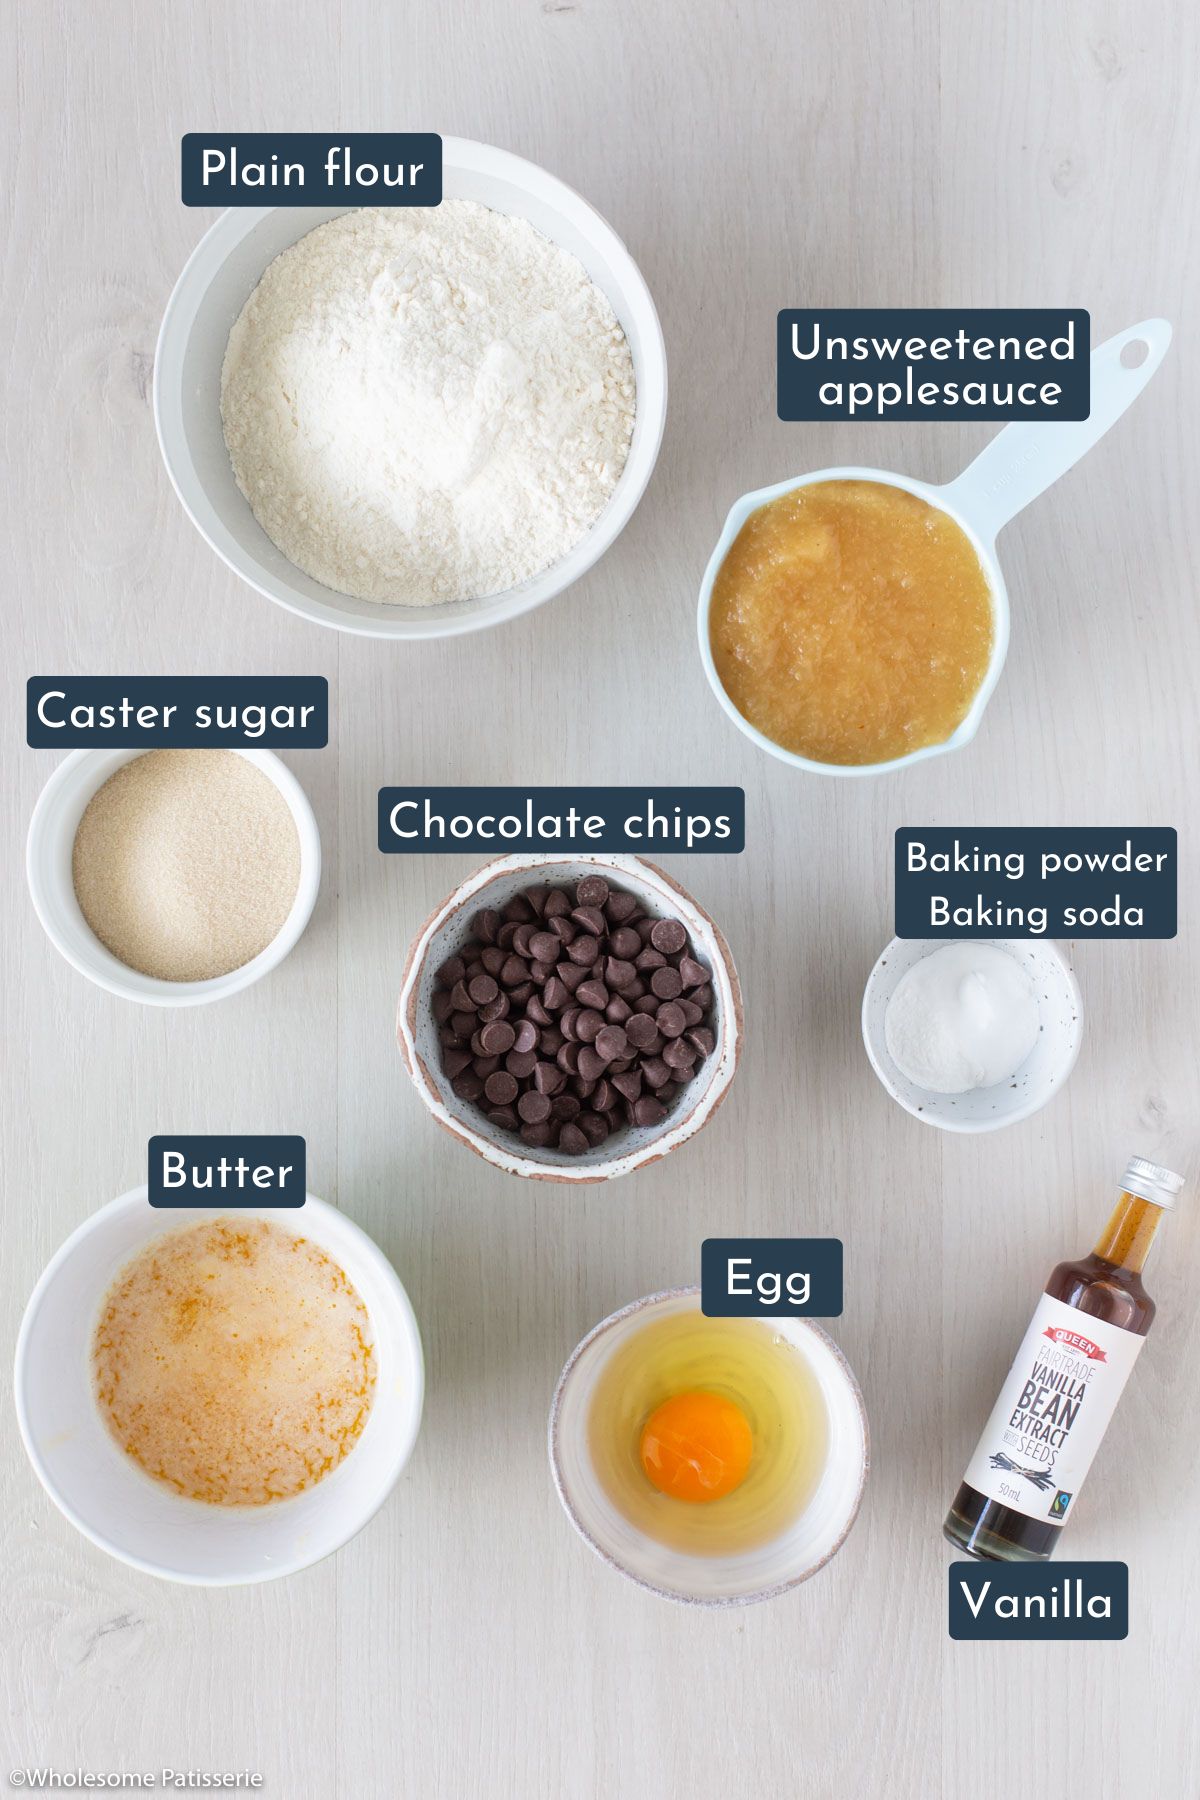 The ingredients you need to make these muffins are plain flour, unsweetened applesauce, caster sugar, chocolate chips, baking powder, baking soda, melted butter, egg and vanilla.